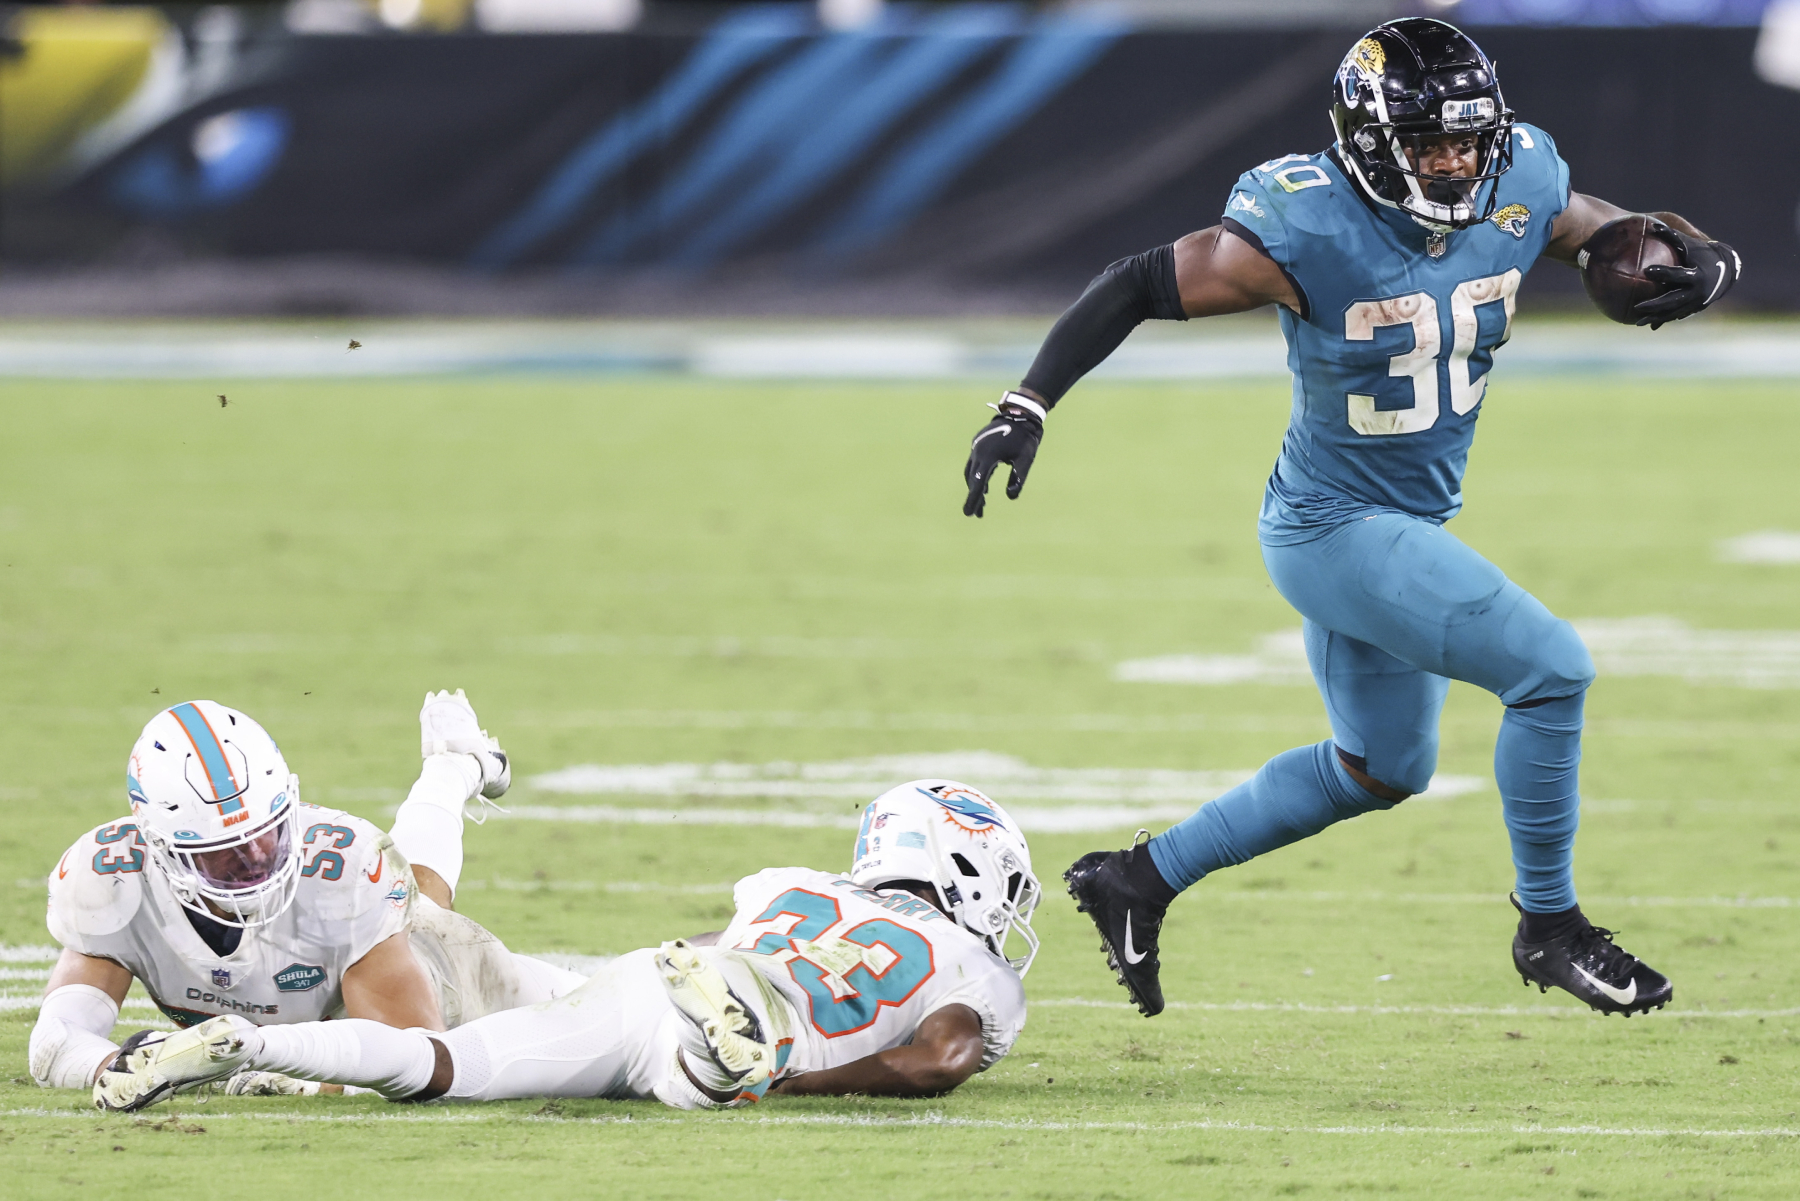 The Jacksonville Jaguars waived running back Leonard Fournette this offseason. However, this has led to James Robinson becoming a star.